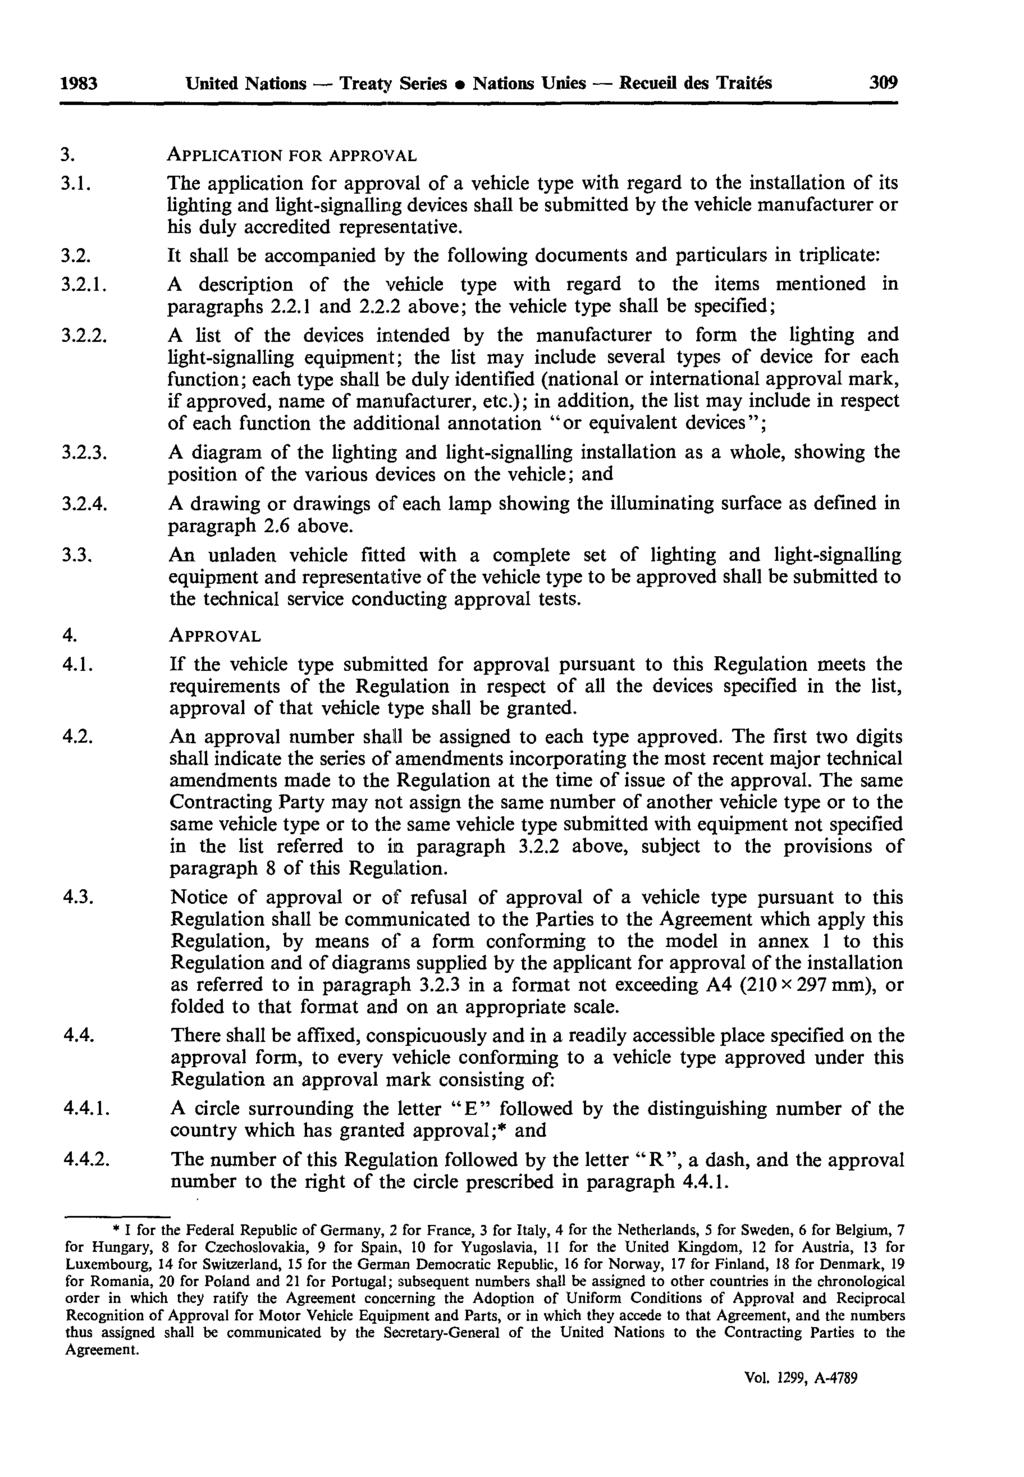 1983 United Nations Treaty Series Nations Unies Recueil des Traités 309 3. APPLICATION FOR APPROVAL 3.1. The application for approval of a vehicle type with regard to the installation of its lighting